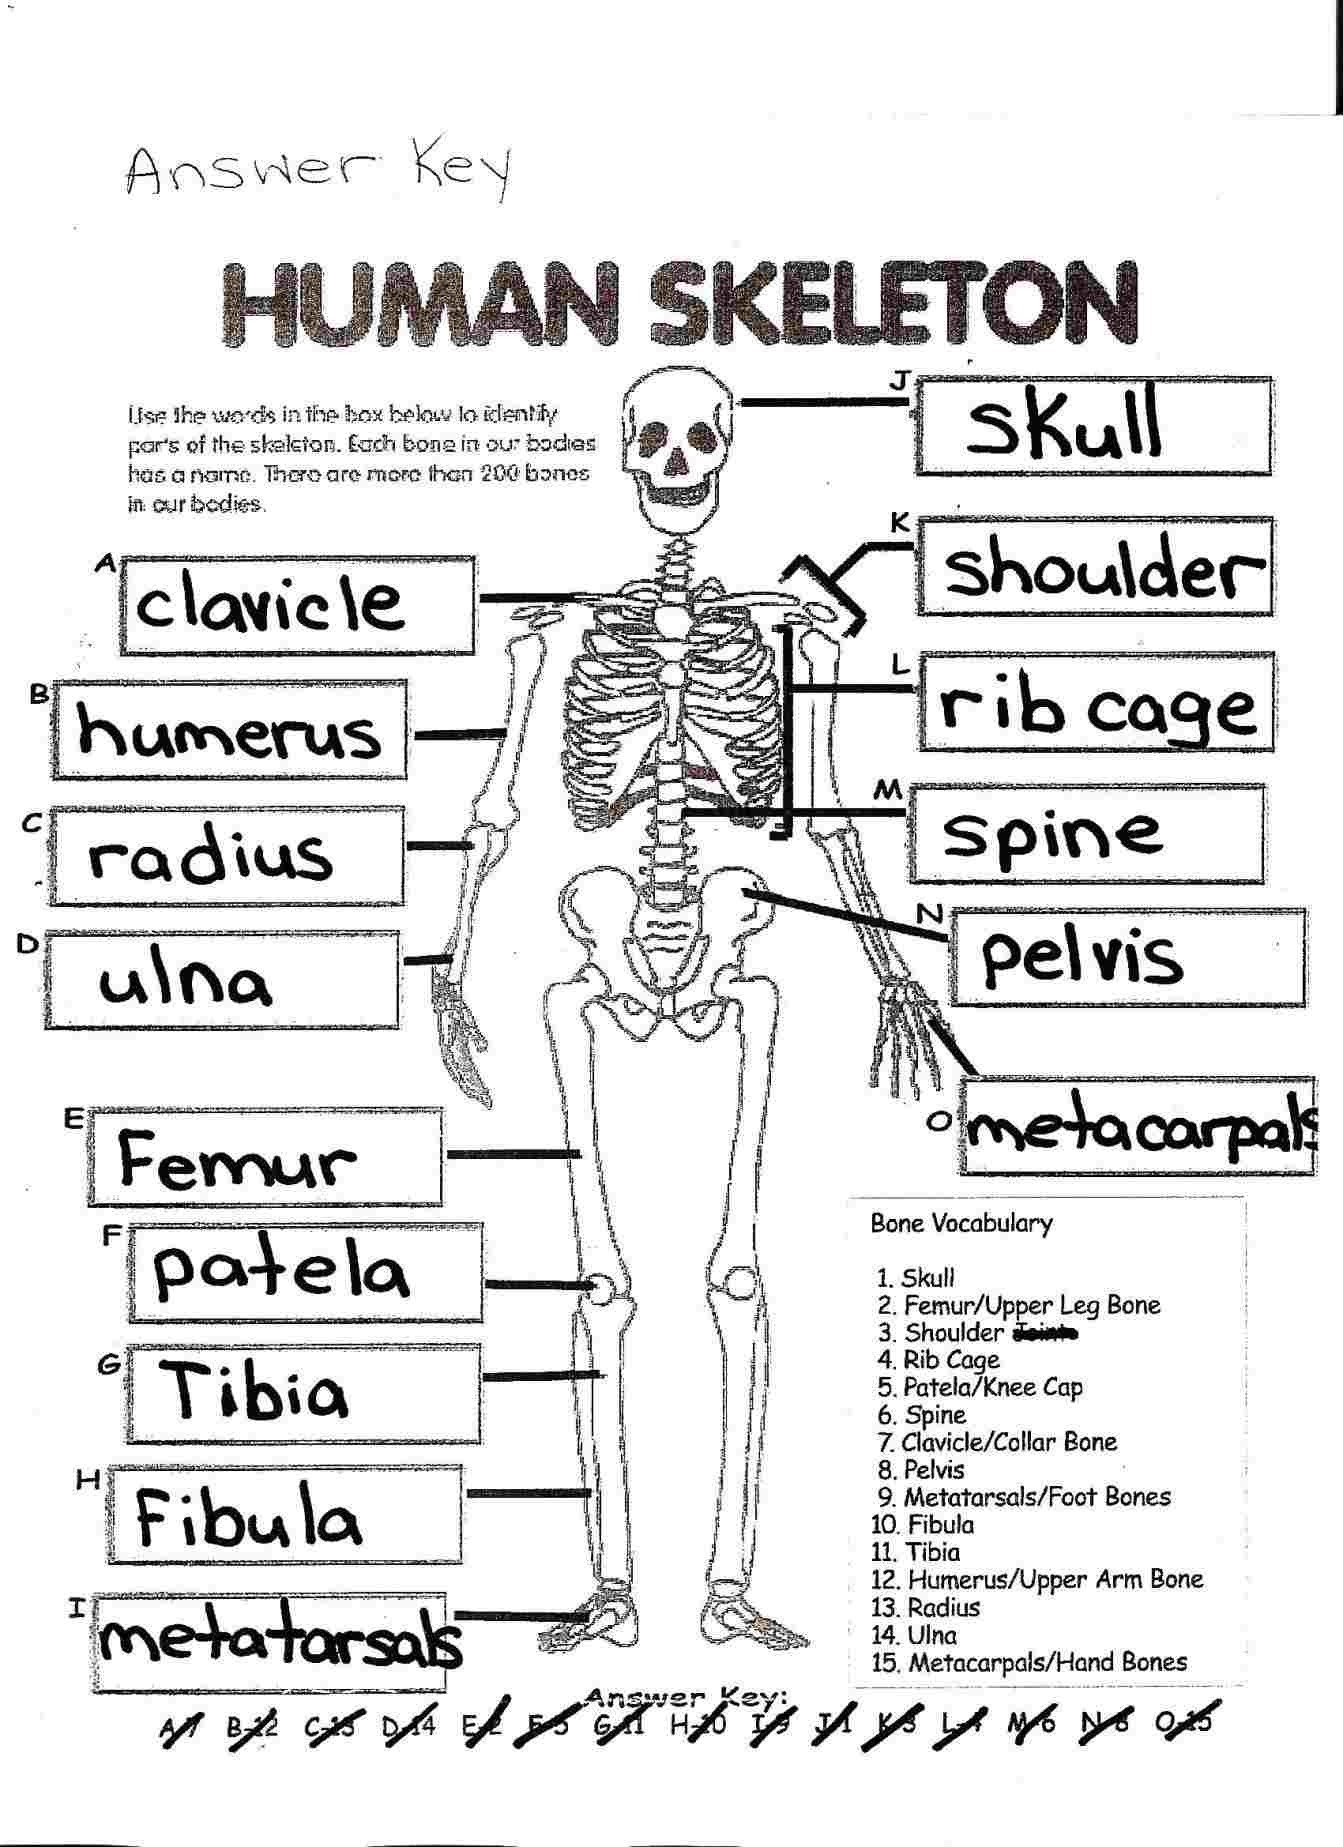 Human Skeleton Coloring Pages Coloring Pages 45 Bones Of The Skull Coloring Pages Picture